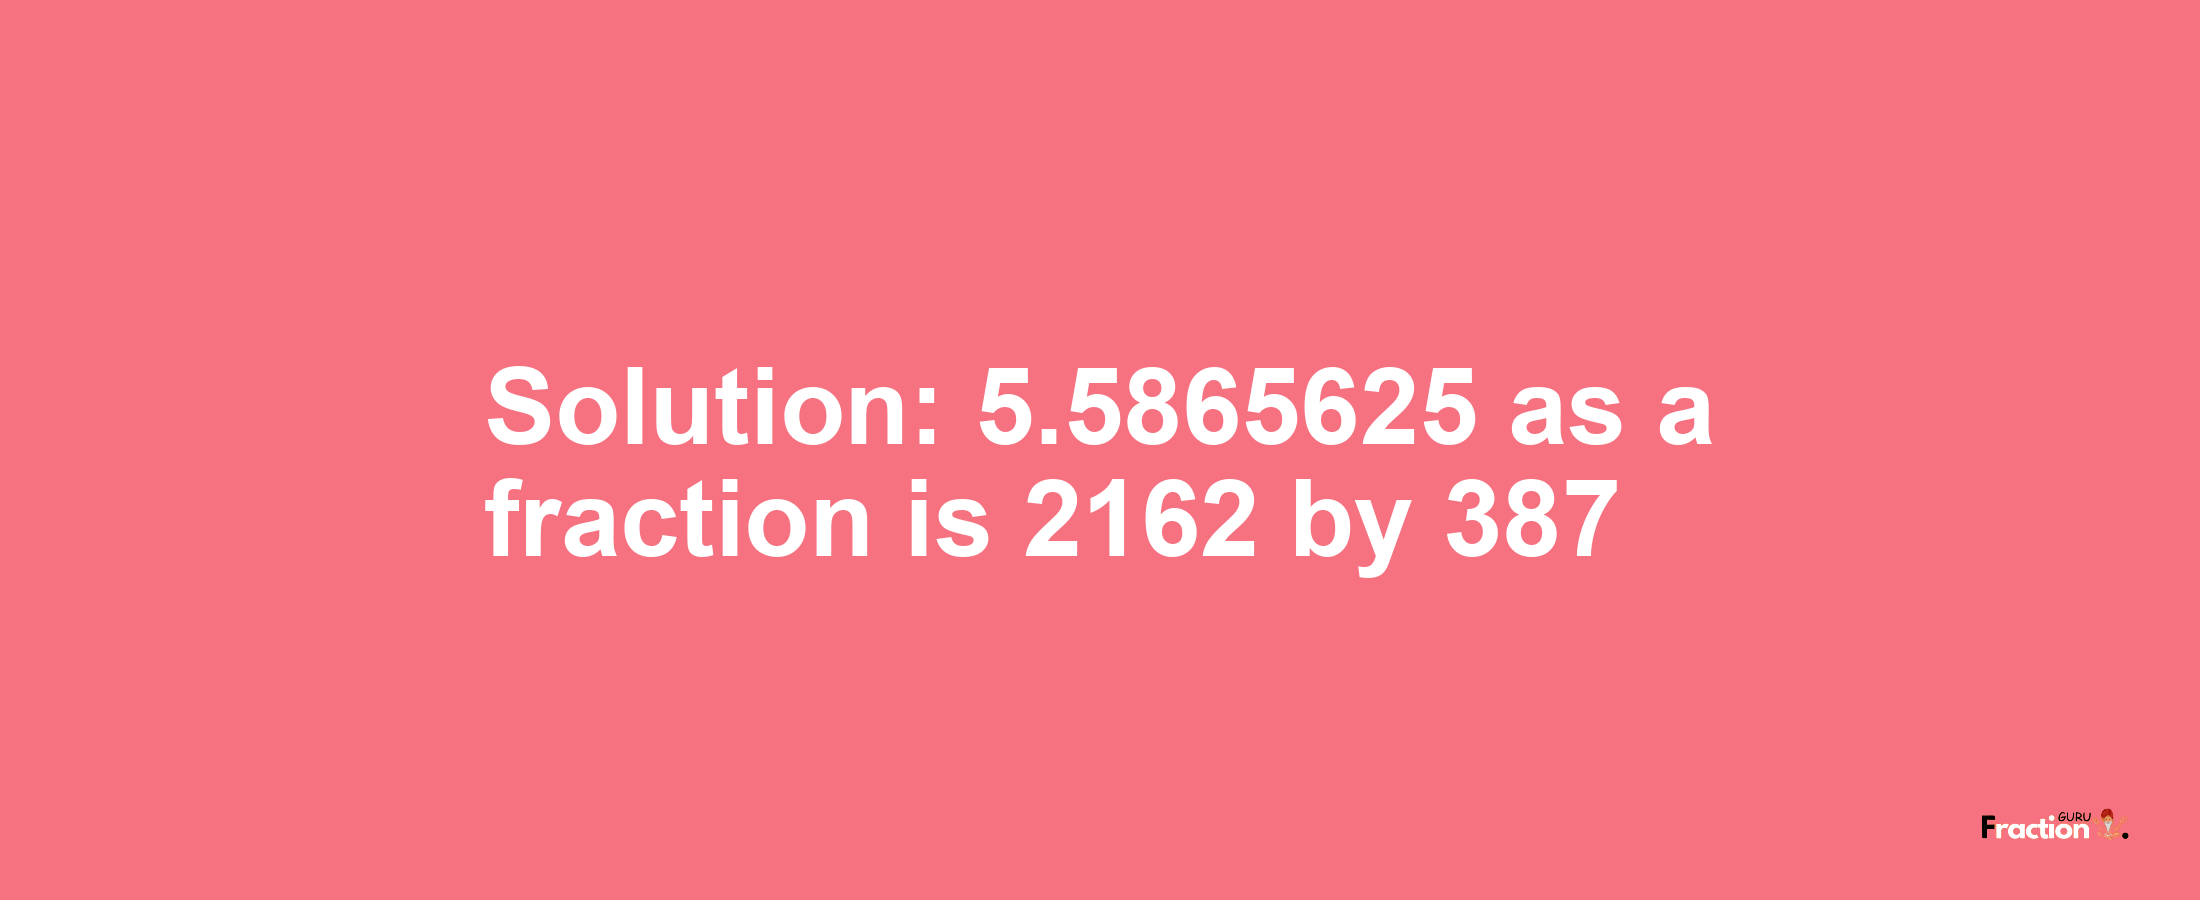 Solution:5.5865625 as a fraction is 2162/387